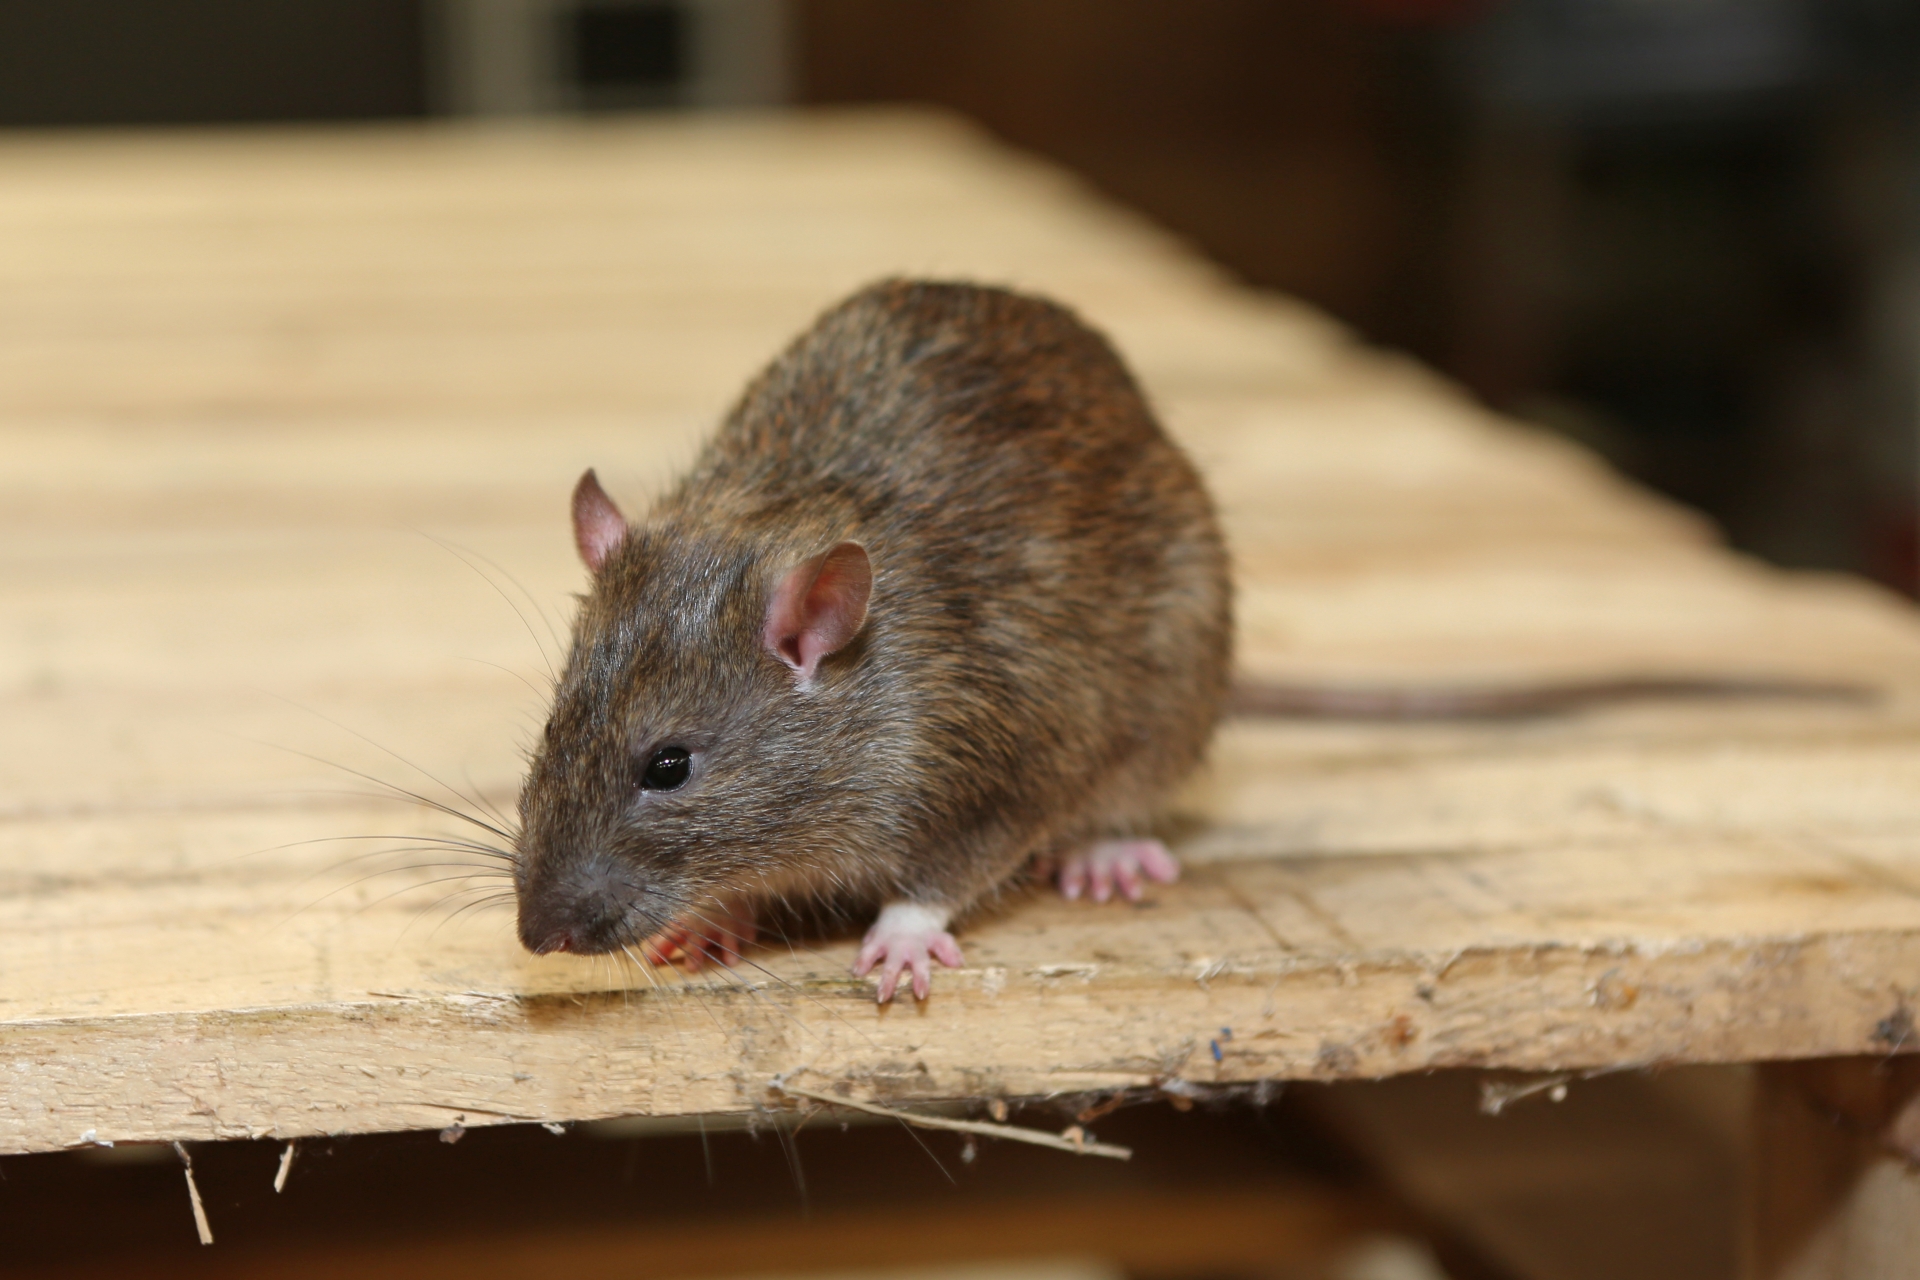 Rat Infestation, Pest Control in Walworth, SE17. Call Now 020 8166 9746